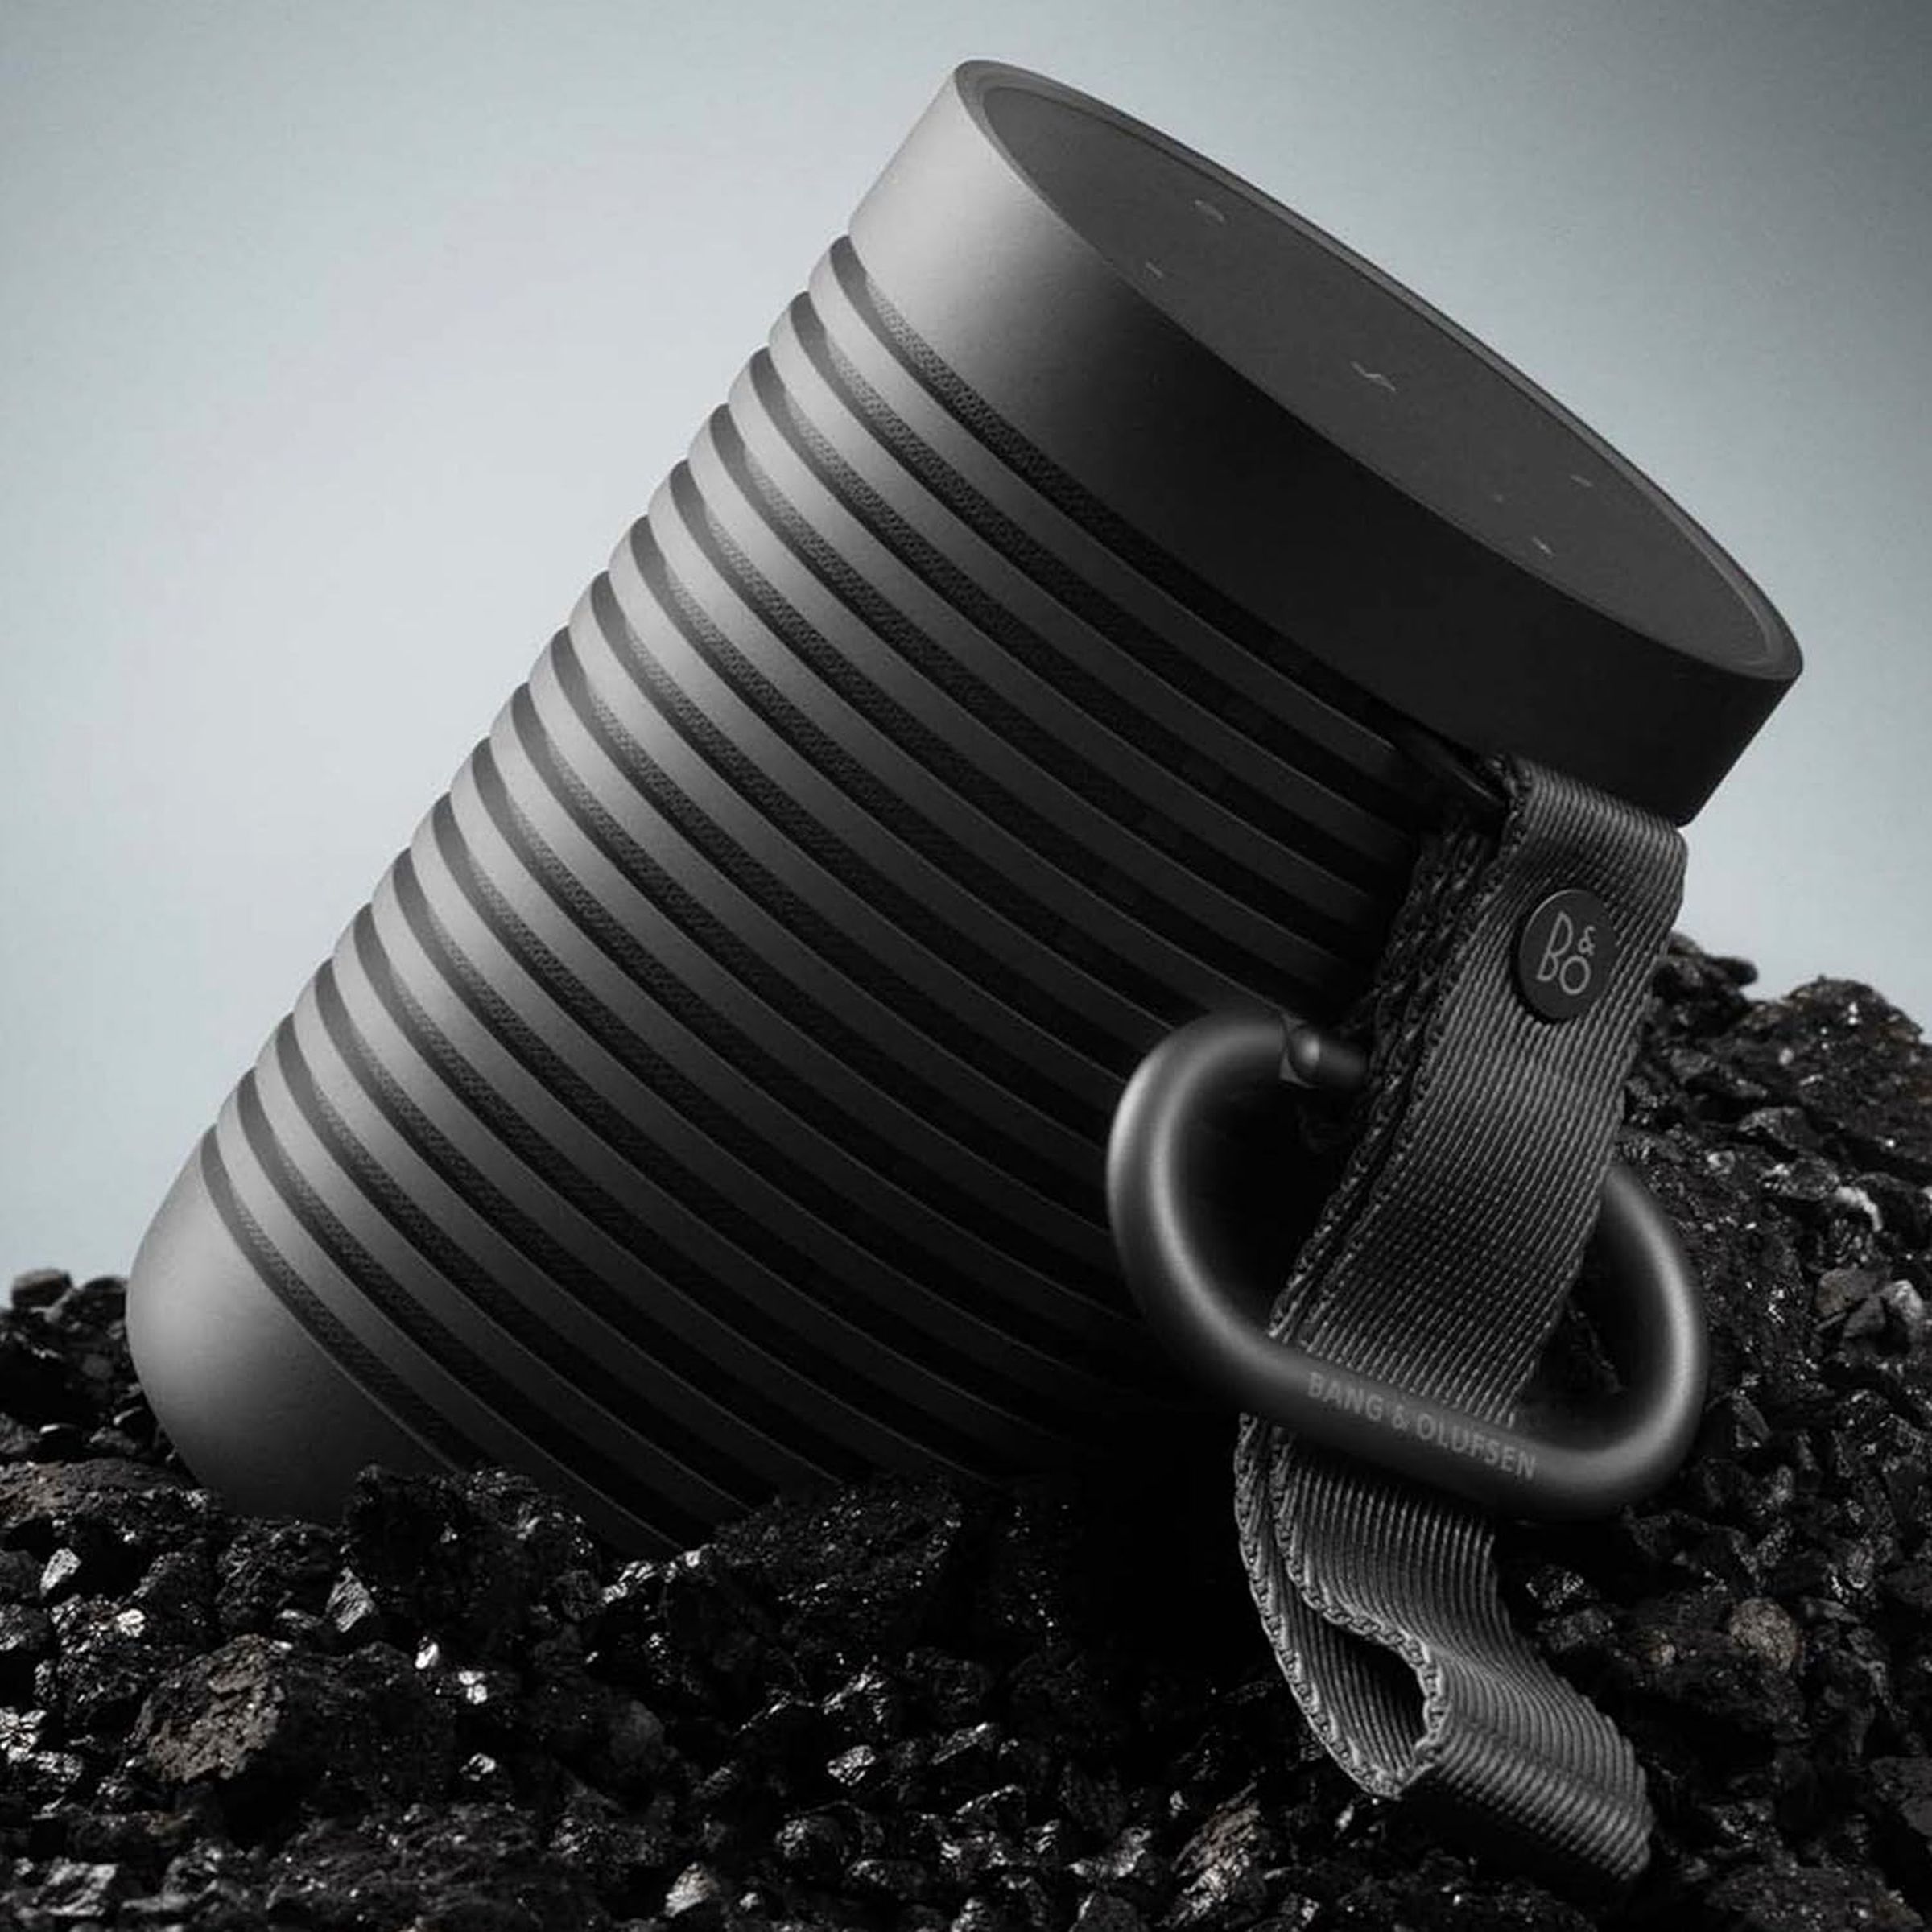 Bang and Olufson Beound Explore portable speaker leaning against rocks